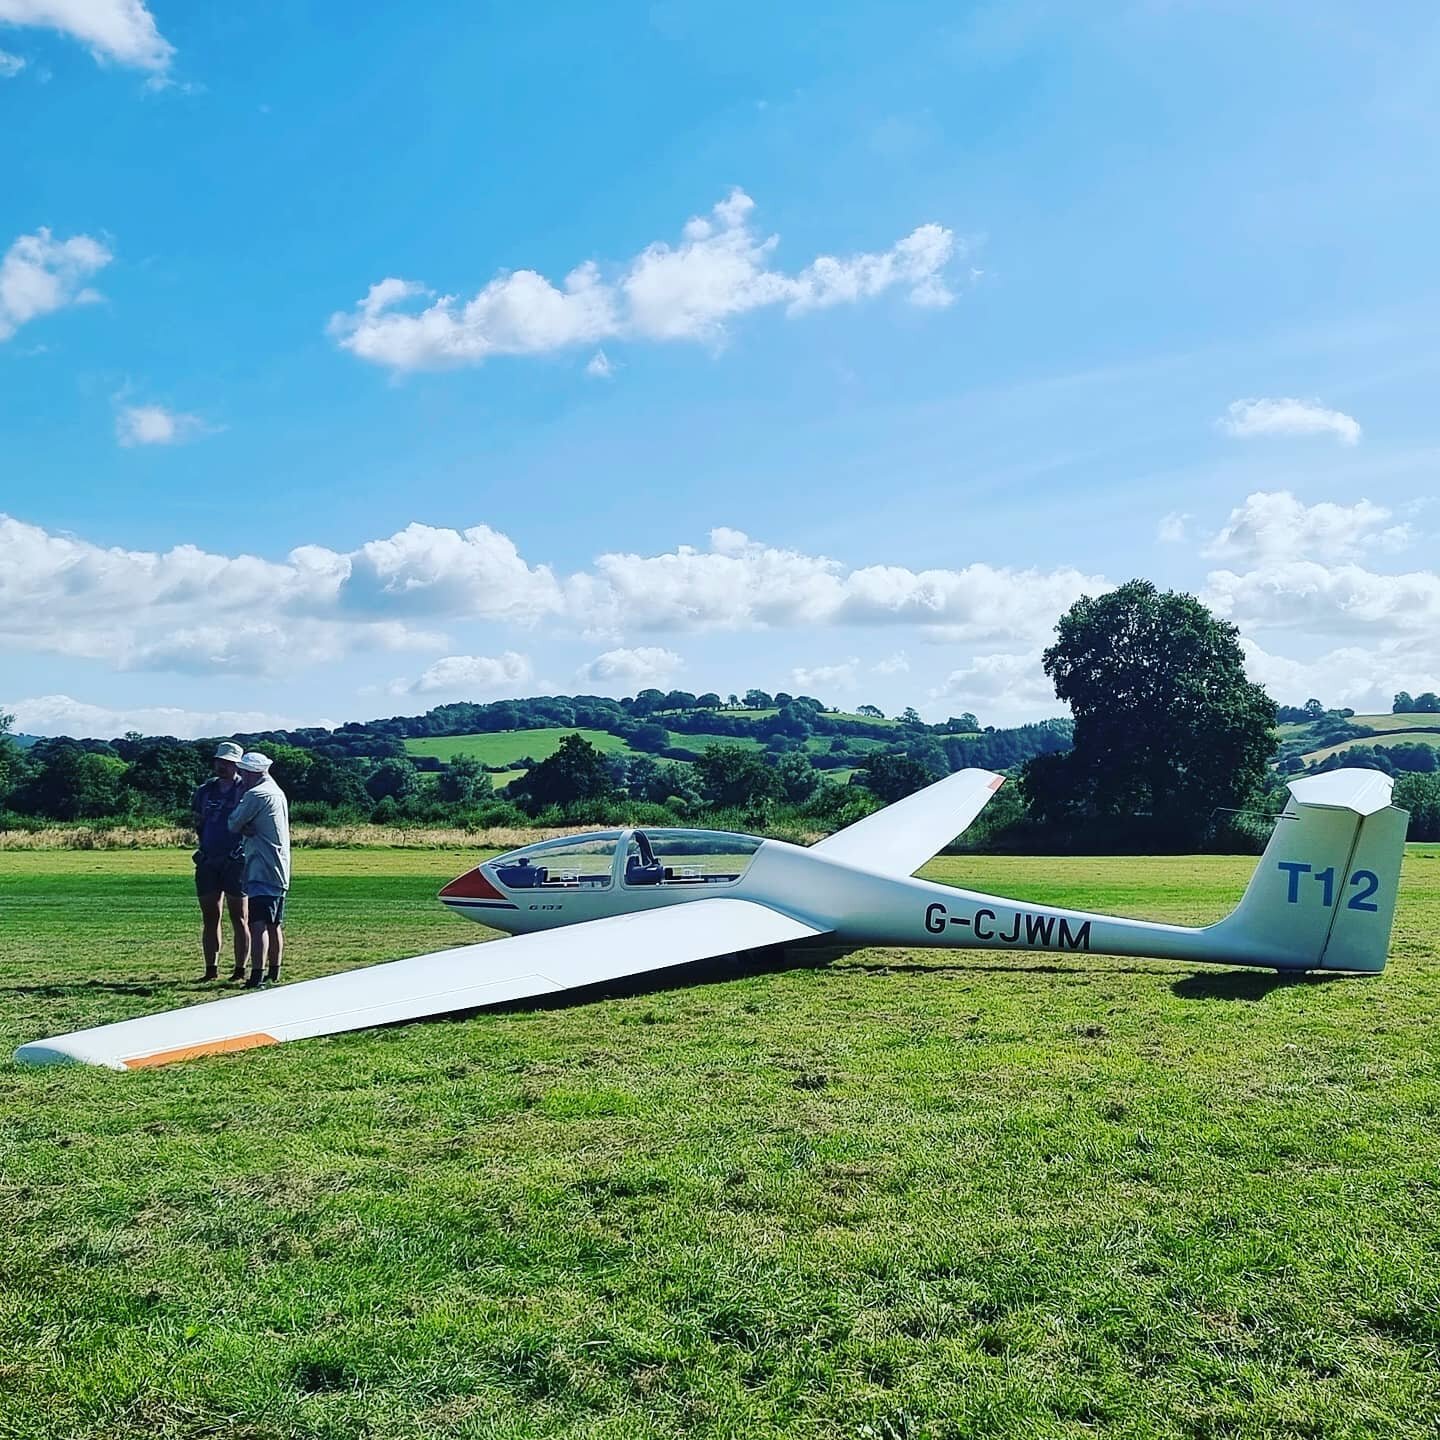 Yesterday was a beautiful day, with new members and existing members alike benefitting from a clear, cloudy day. 

#soaring #gliding #aviation #monmouth #pilot #glider